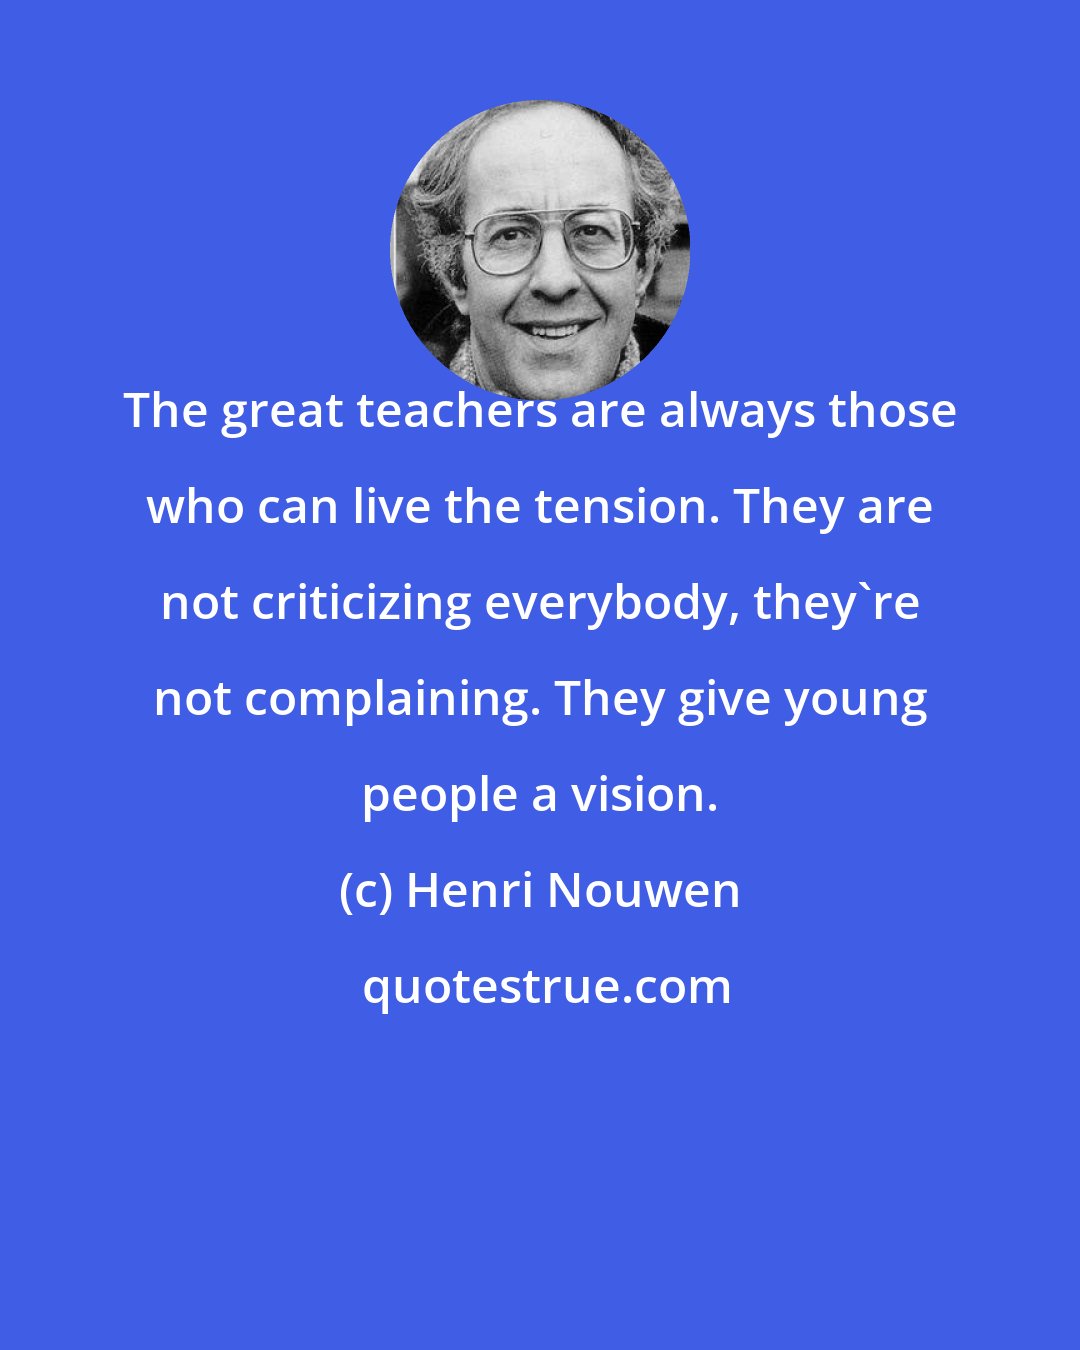 Henri Nouwen: The great teachers are always those who can live the tension. They are not criticizing everybody, they're not complaining. They give young people a vision.